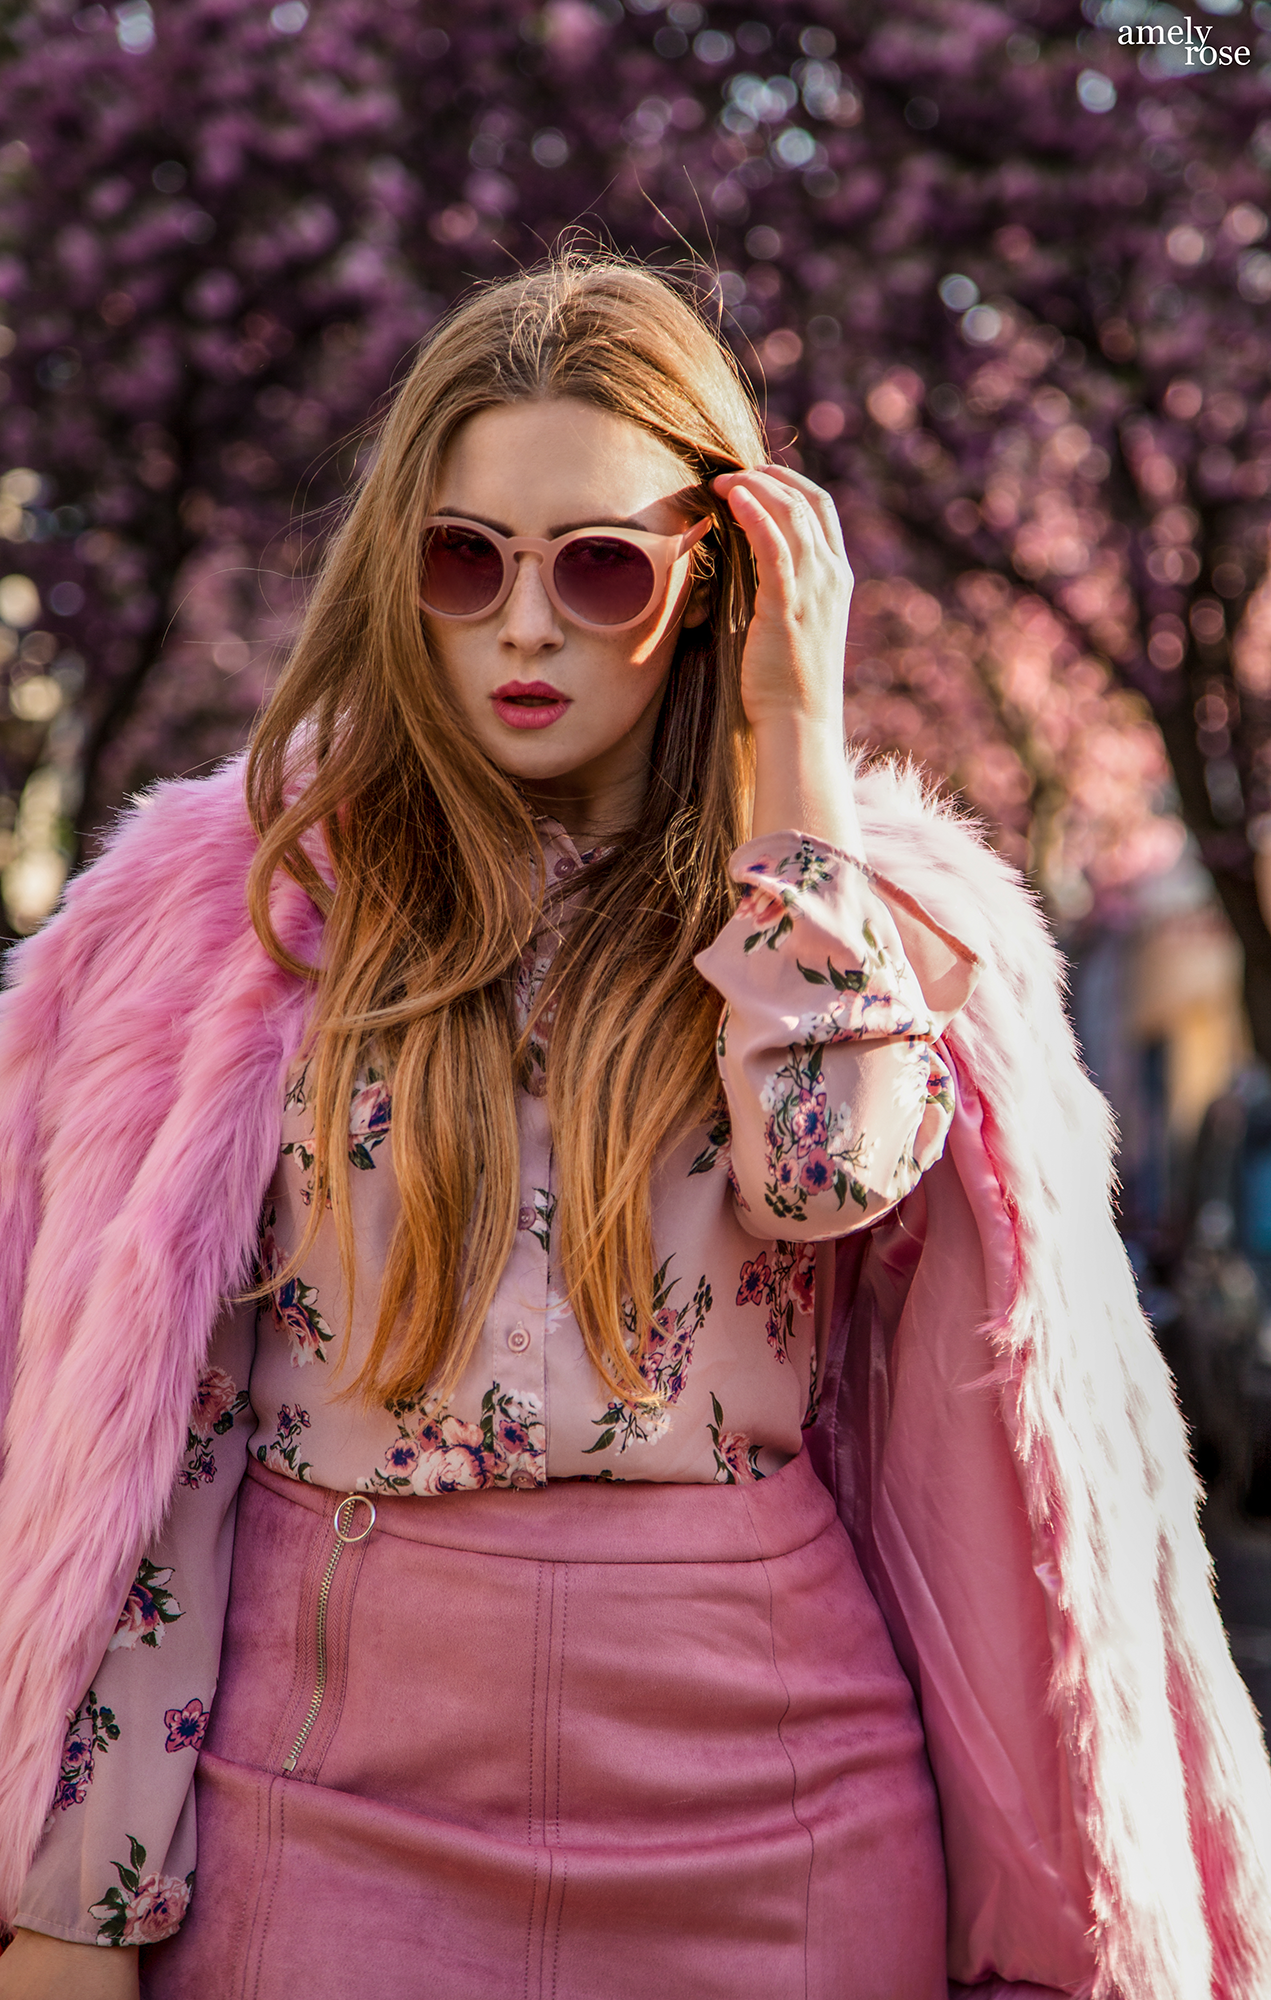 Amely Rose german fashionblogger in Bonn between the cherryblossom – fashioneditorial – spring outfit - kirschblüten altstadt